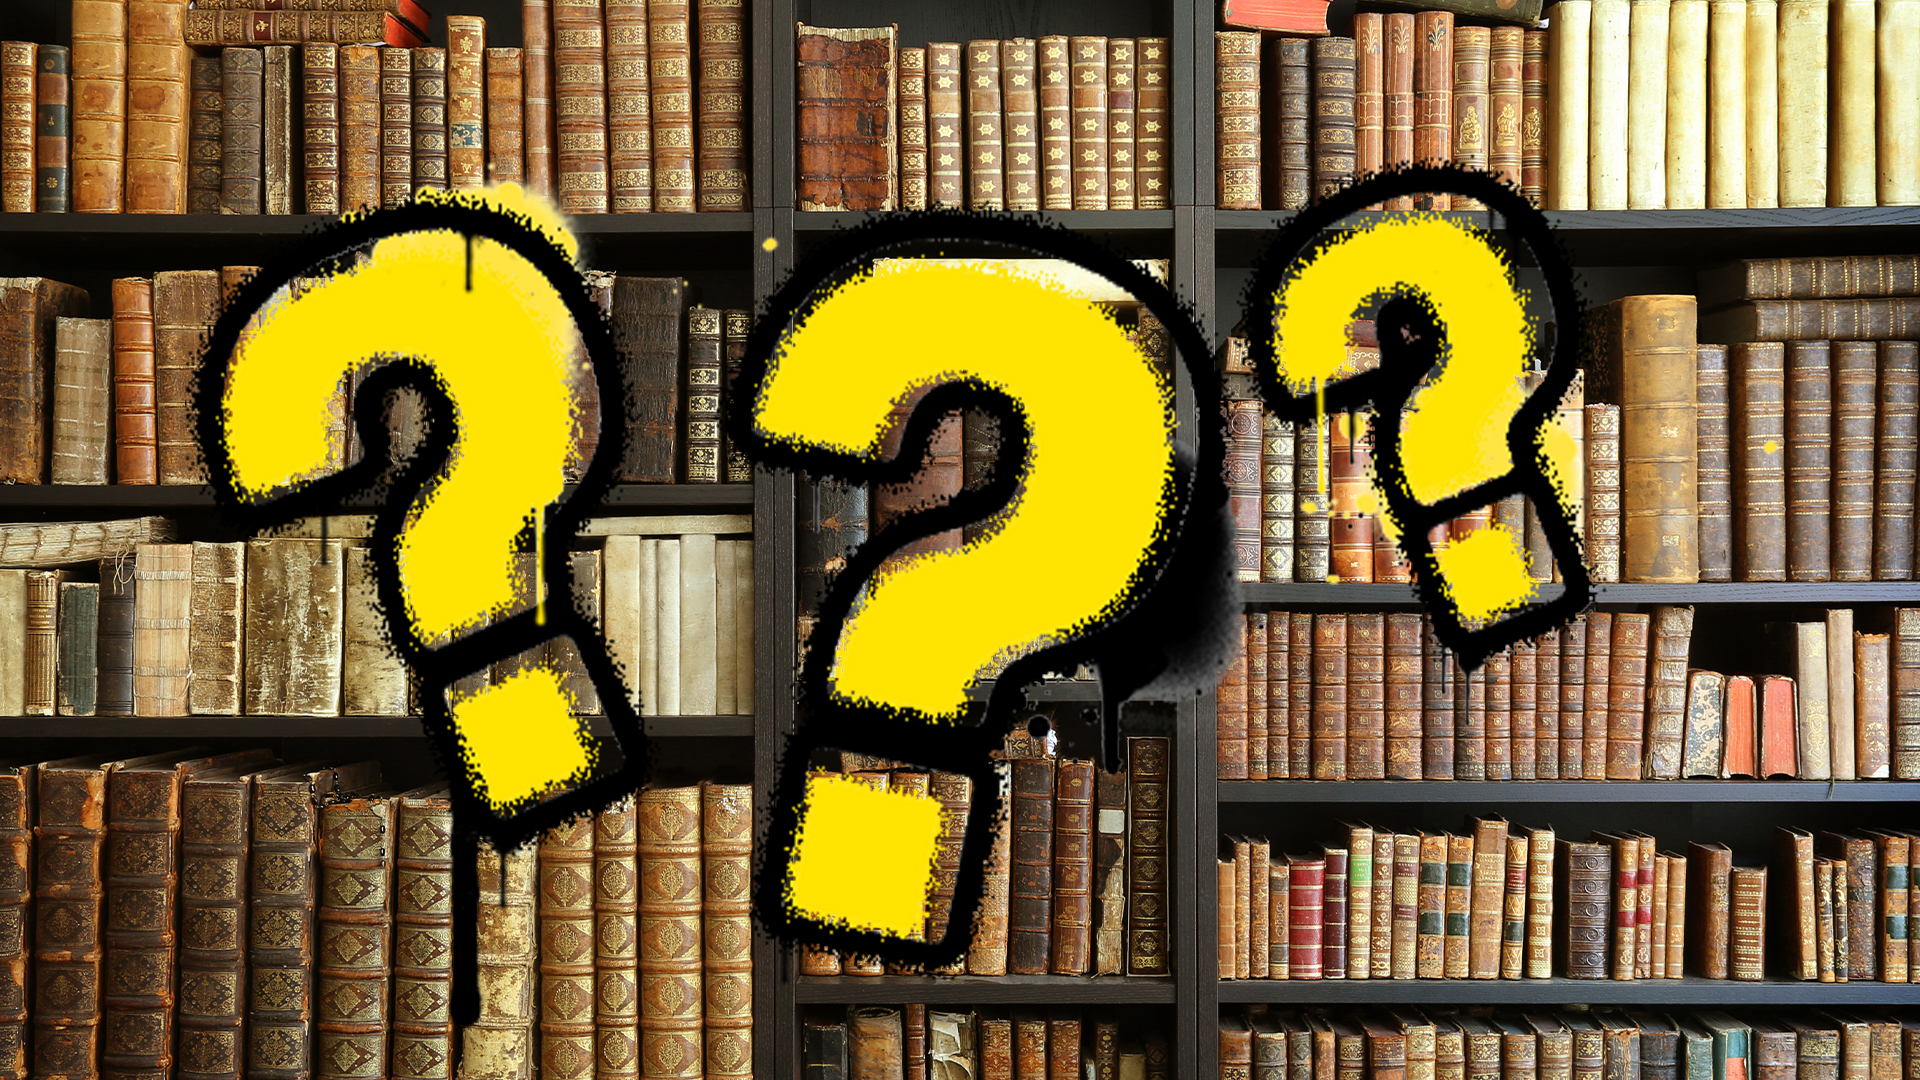 Old books and question marks